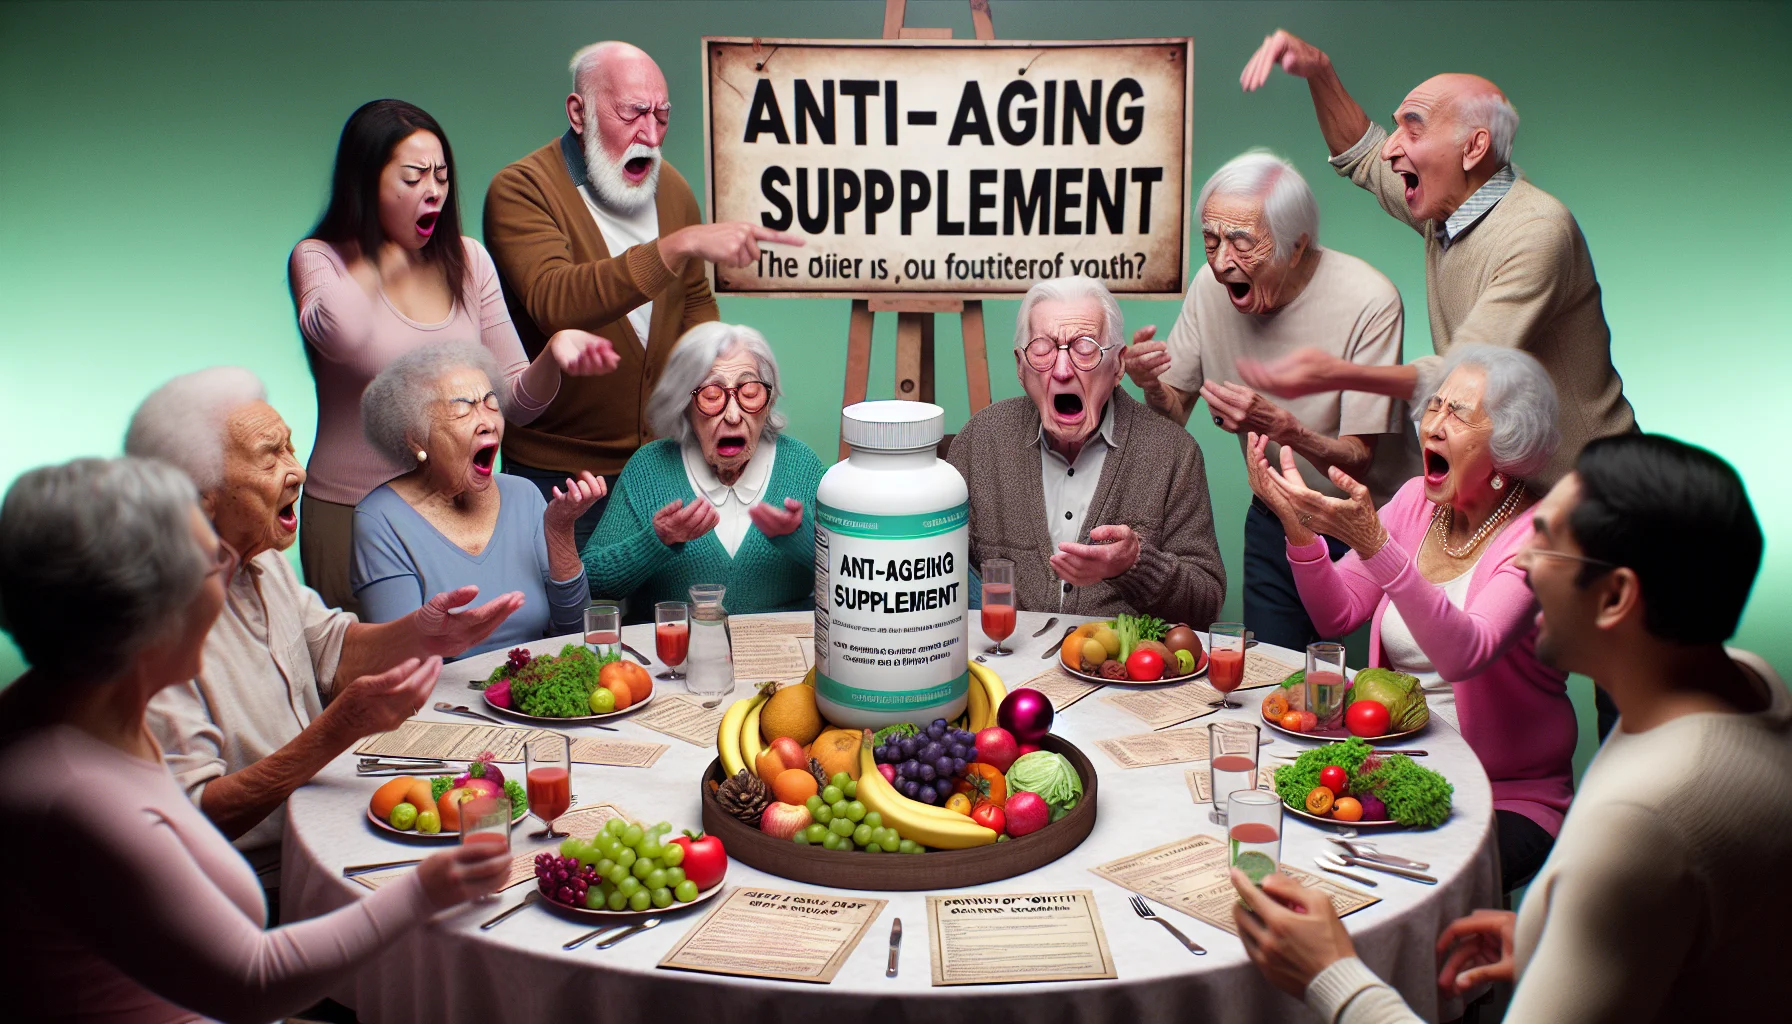 Generate a humorous and realistic image that visualizes the idea of anti-aging supplements with an emphasis on elders, diets and healthy eating. Imagine an animated scene where a group of elderly people of various descents, including a Caucasian man, a Hispanic woman, a Black man, a Middle-Eastern woman, a South Asian man, and a White woman. All are sitting around a circular table, laughingly trying to decipher the 'fountain of youth' from a bottle labeled 'Anti-Ageing Supplement'. Their table is filled with a healthy and vibrant array of fruits, vegetables, whole grains, and lean proteins. The baffling instruction manual and their humorous attempts to understand it adds to the comedic nature of the image.